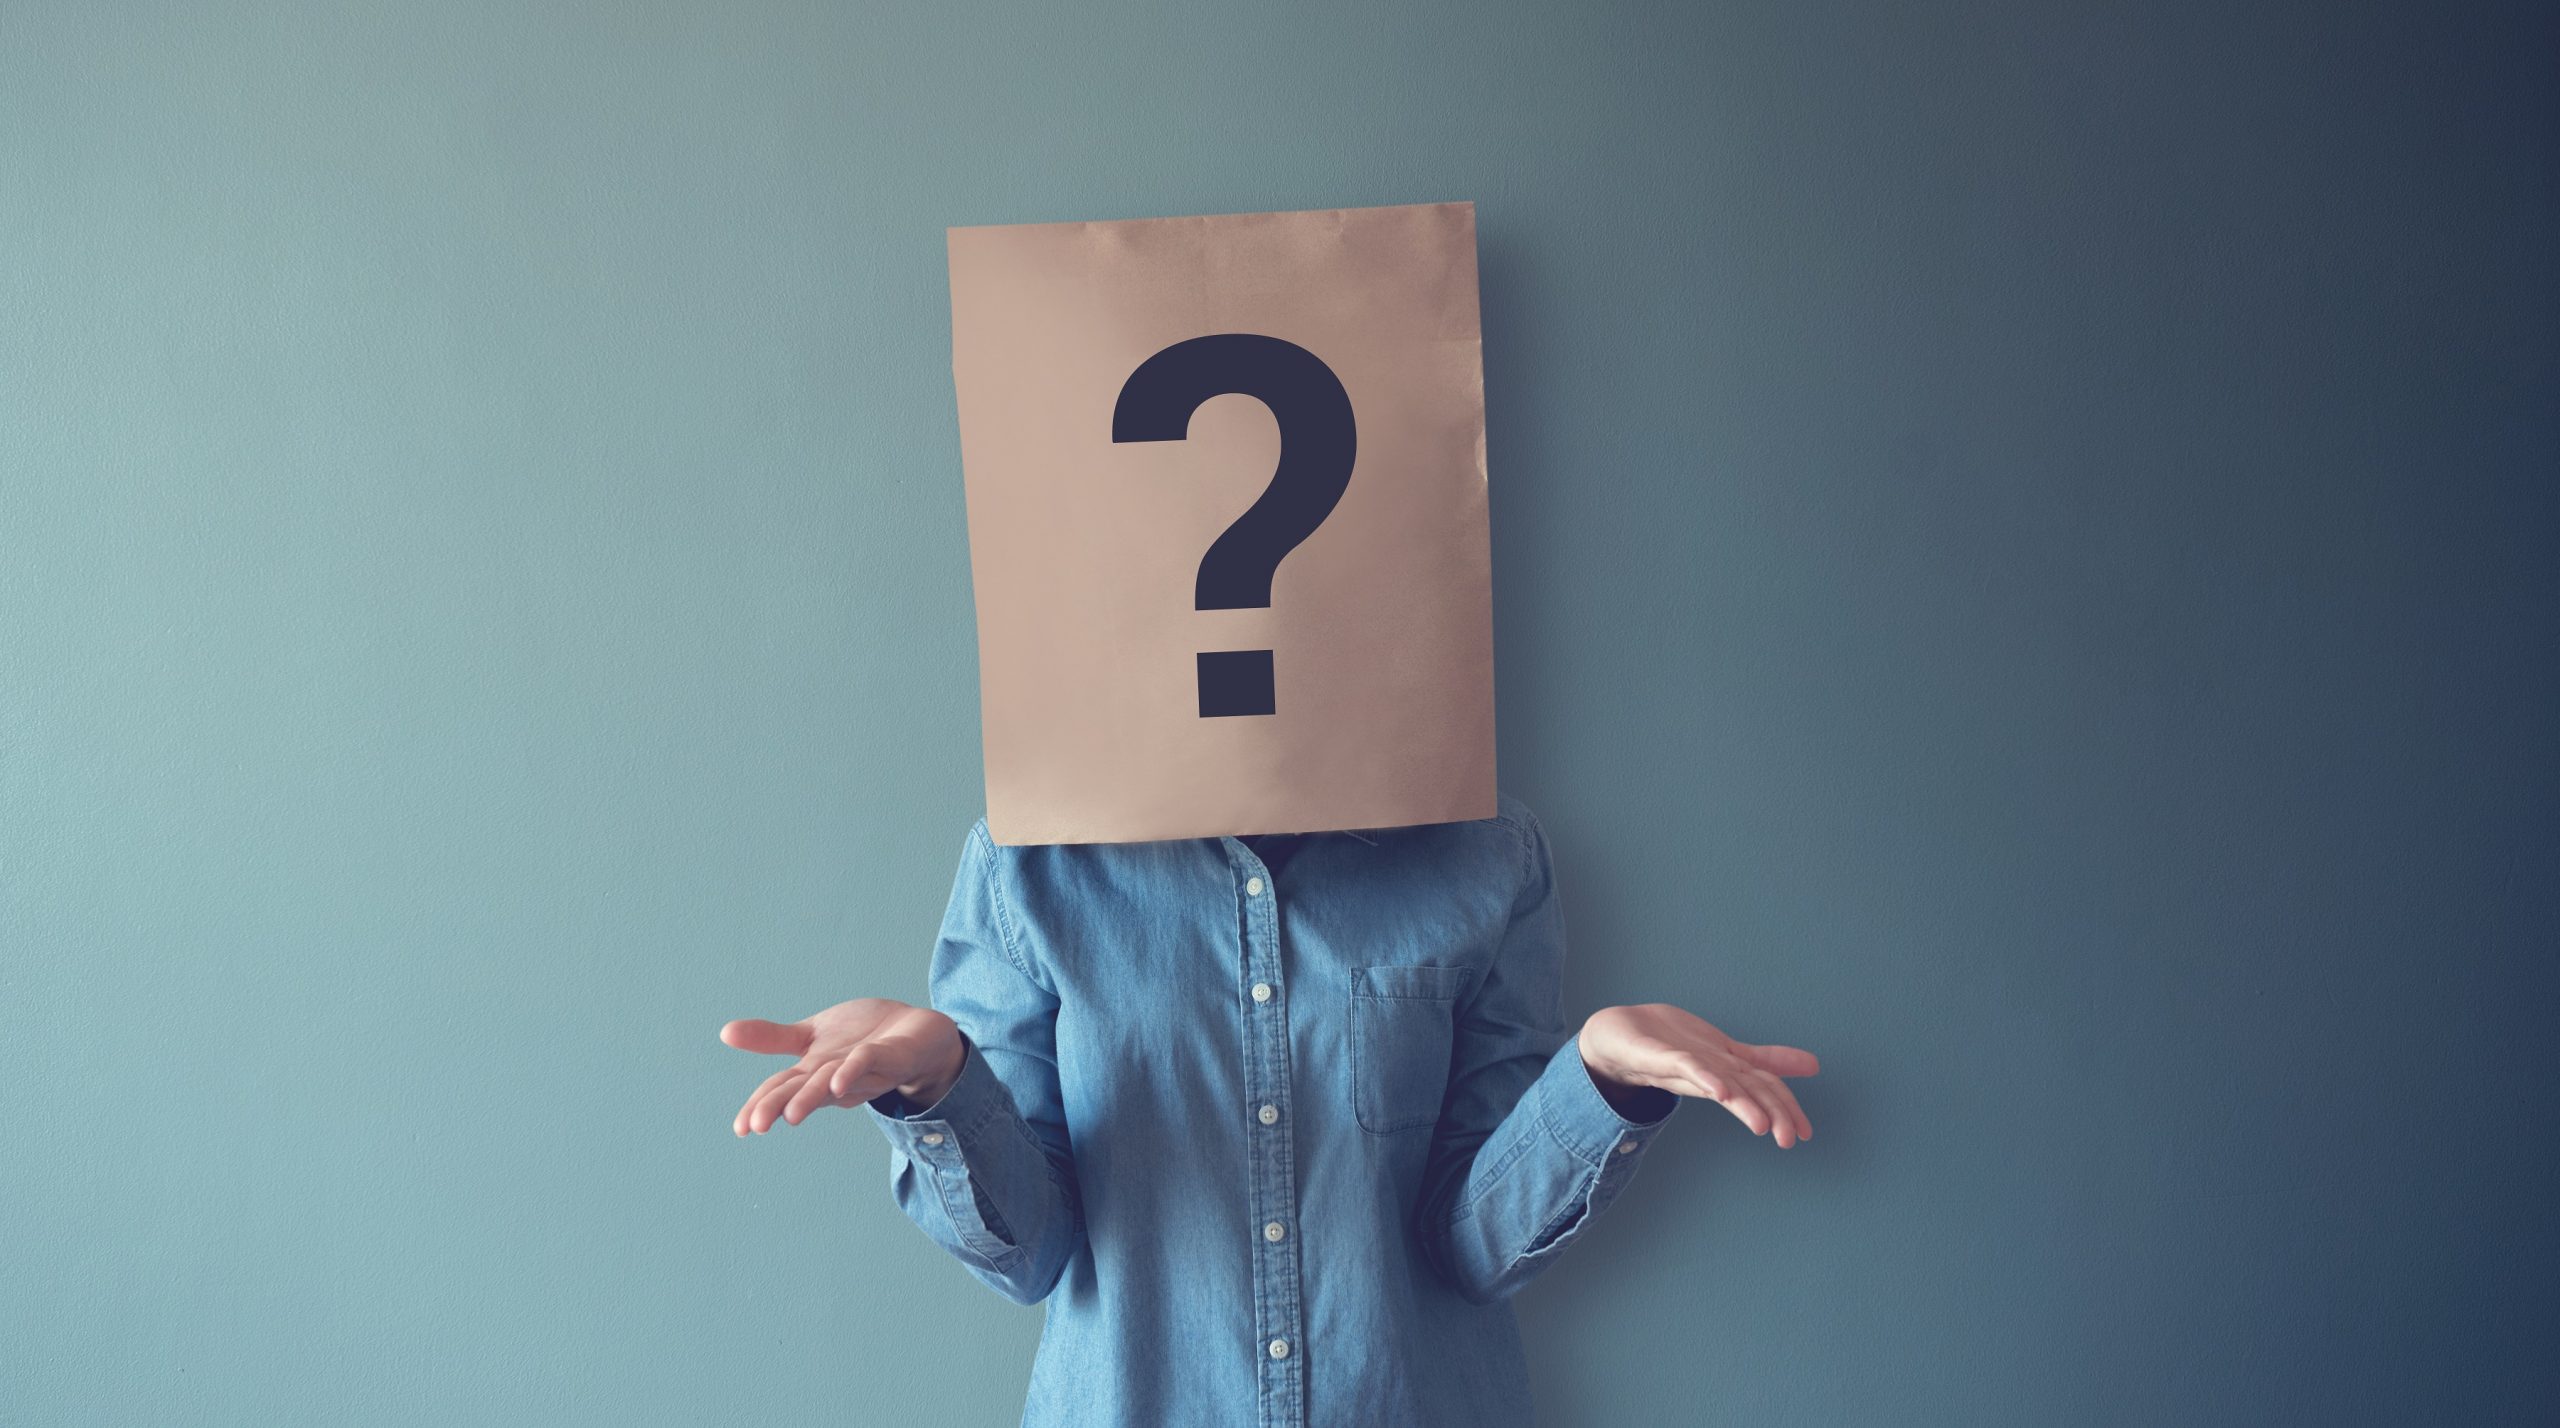 Woman confused with a paper bag featuring a question mark on her head